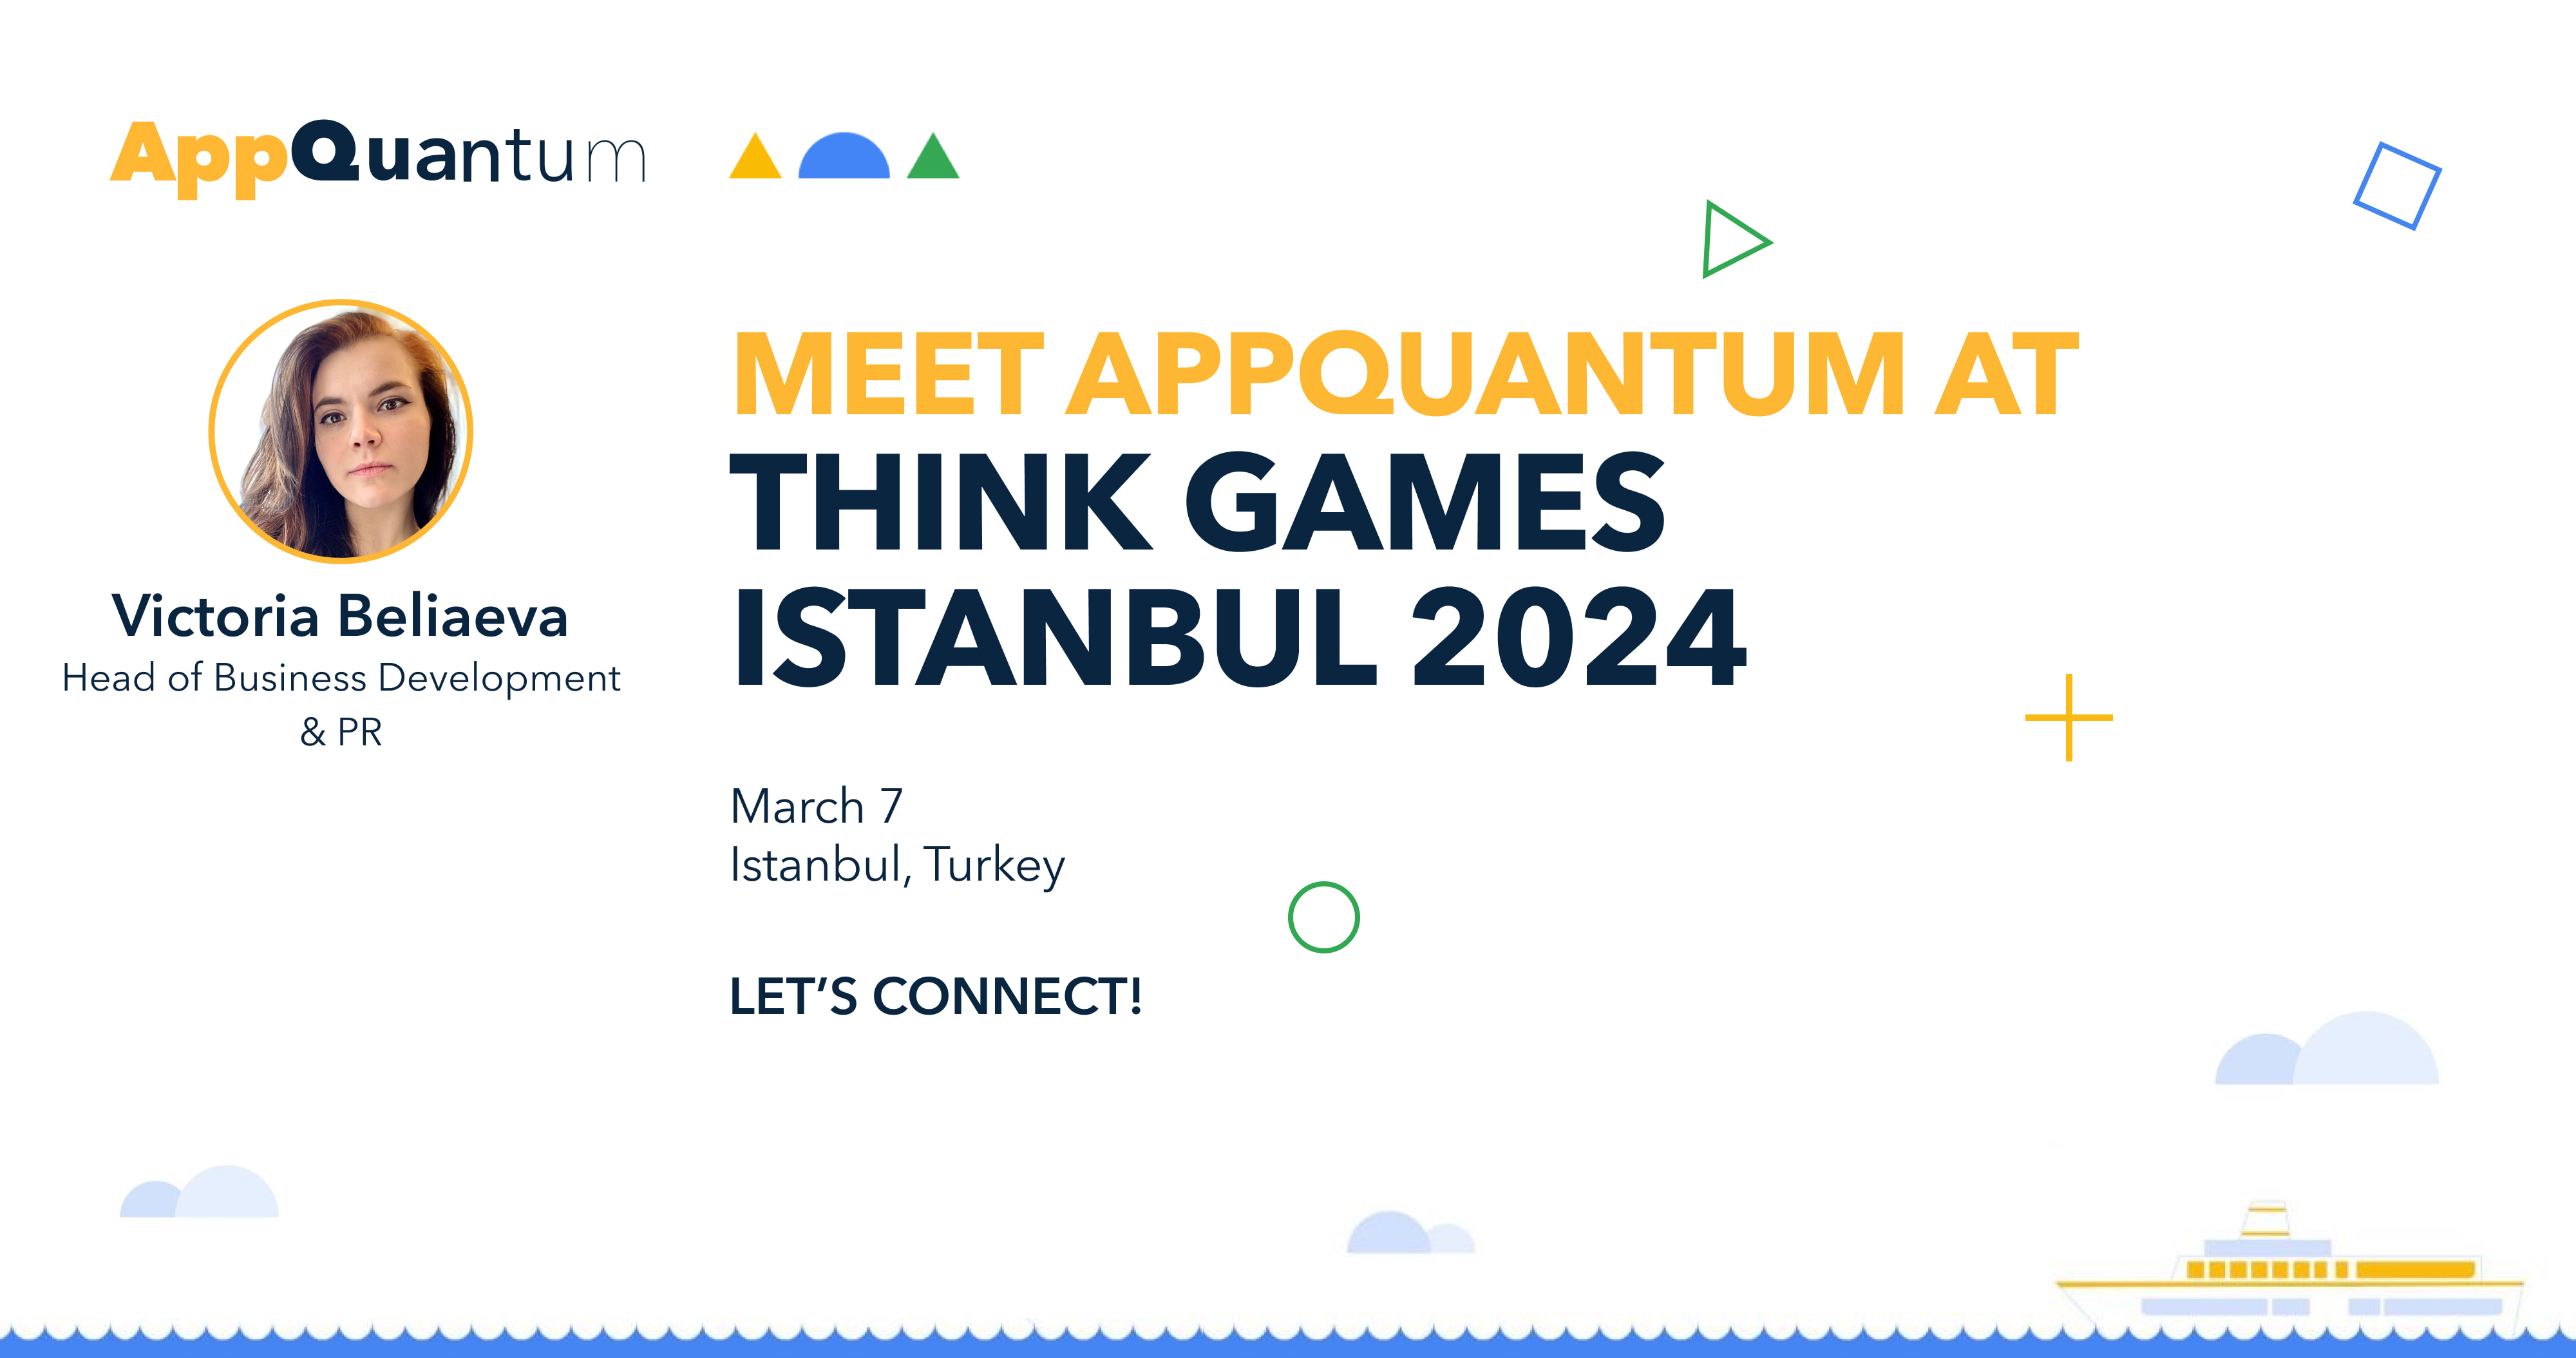 Meet AppQuantum at Think Games Istanbul 2024!